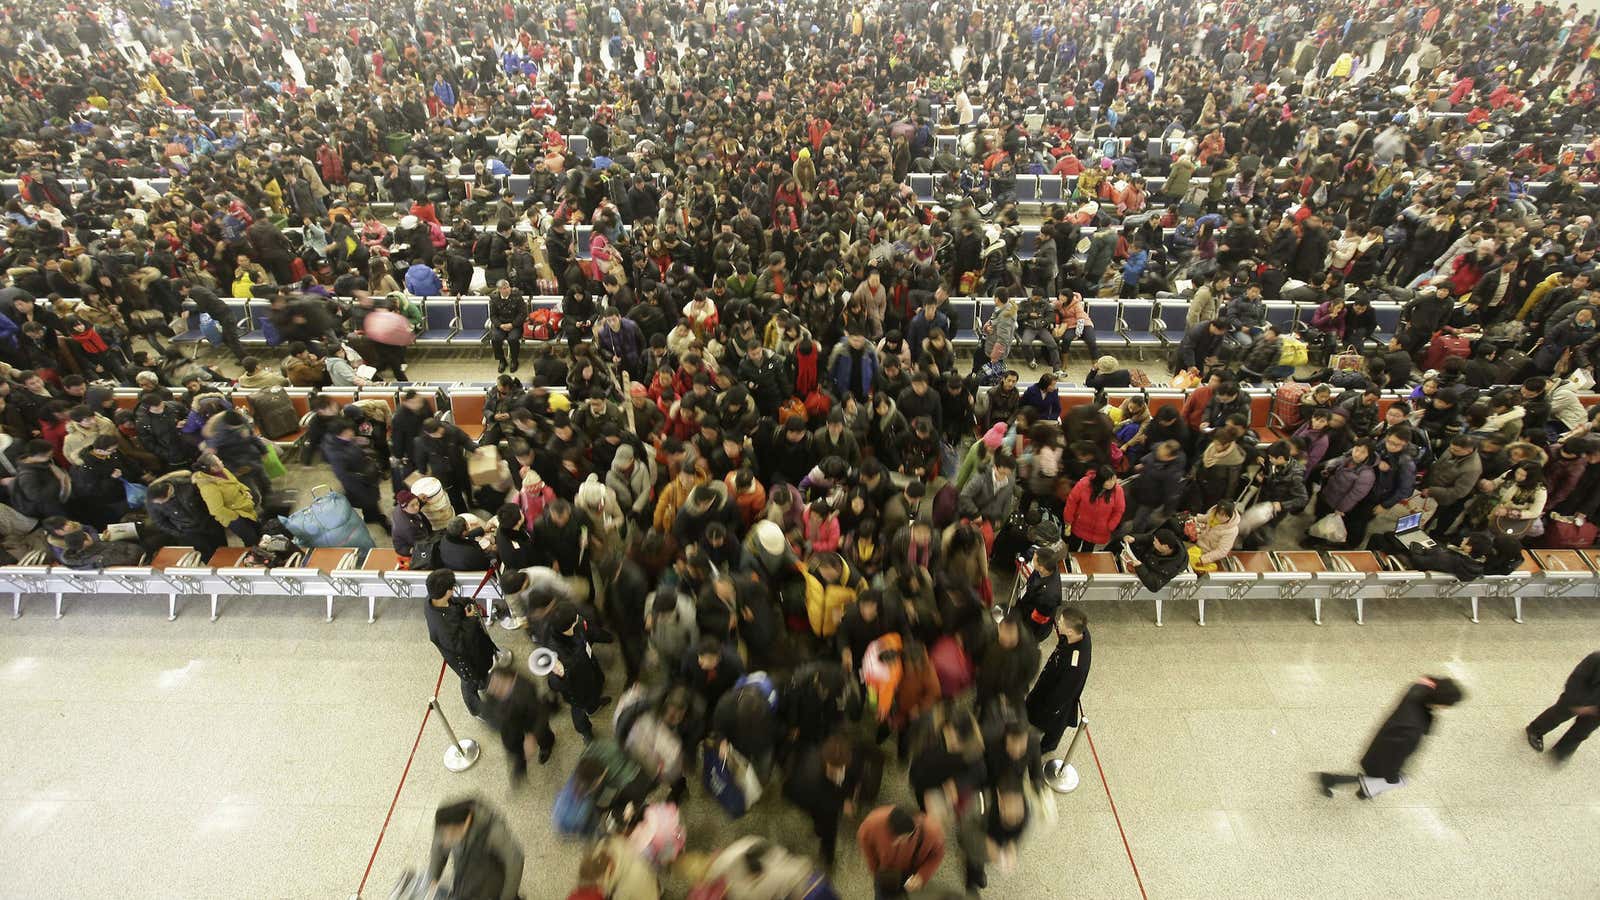 Nothing says “Happy Spring Festival” like a packed train station.